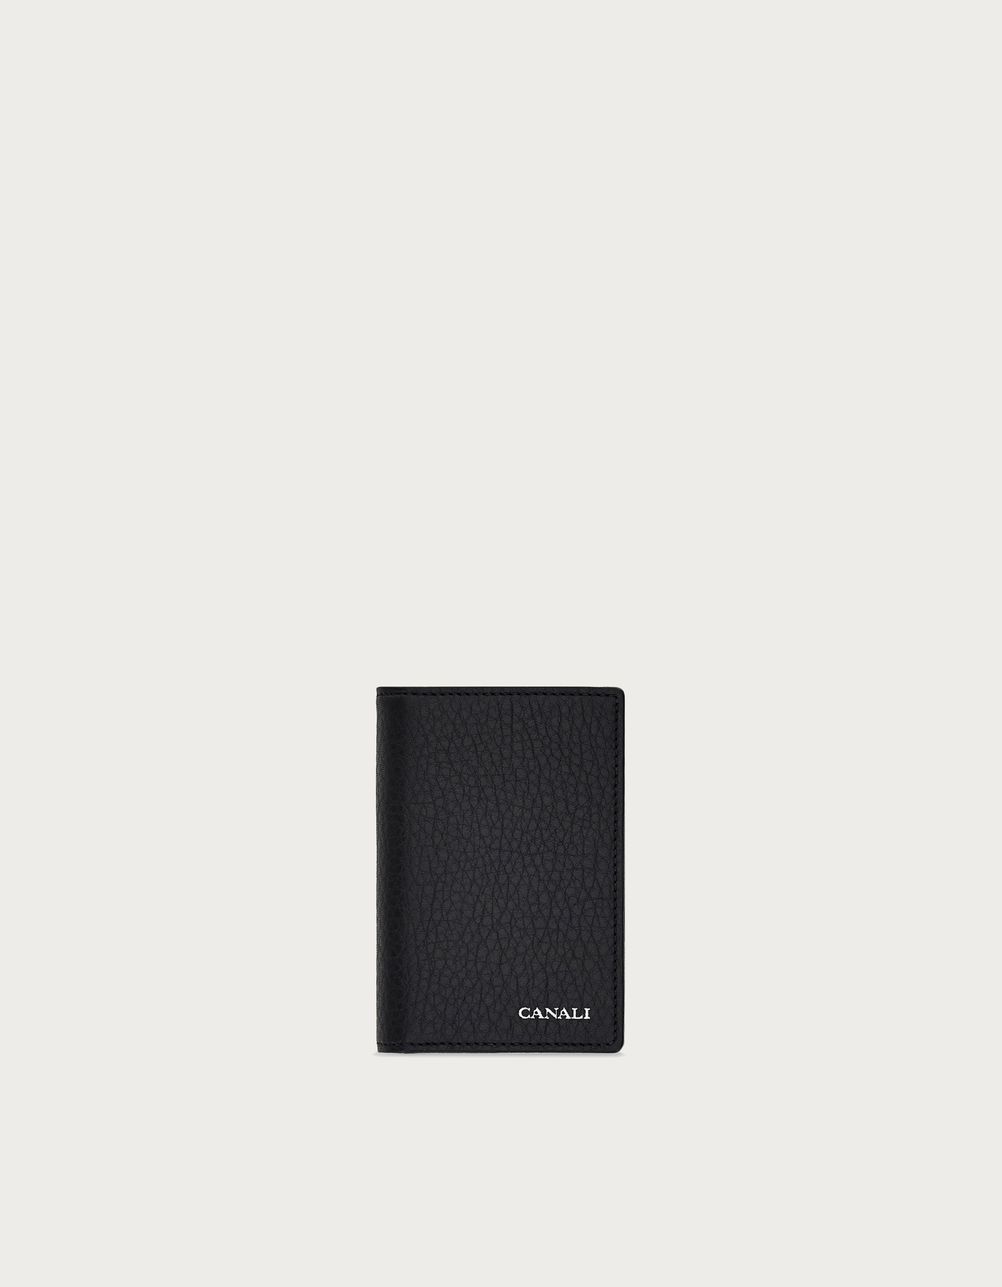 Card holder with flap in black tumbled calfskin